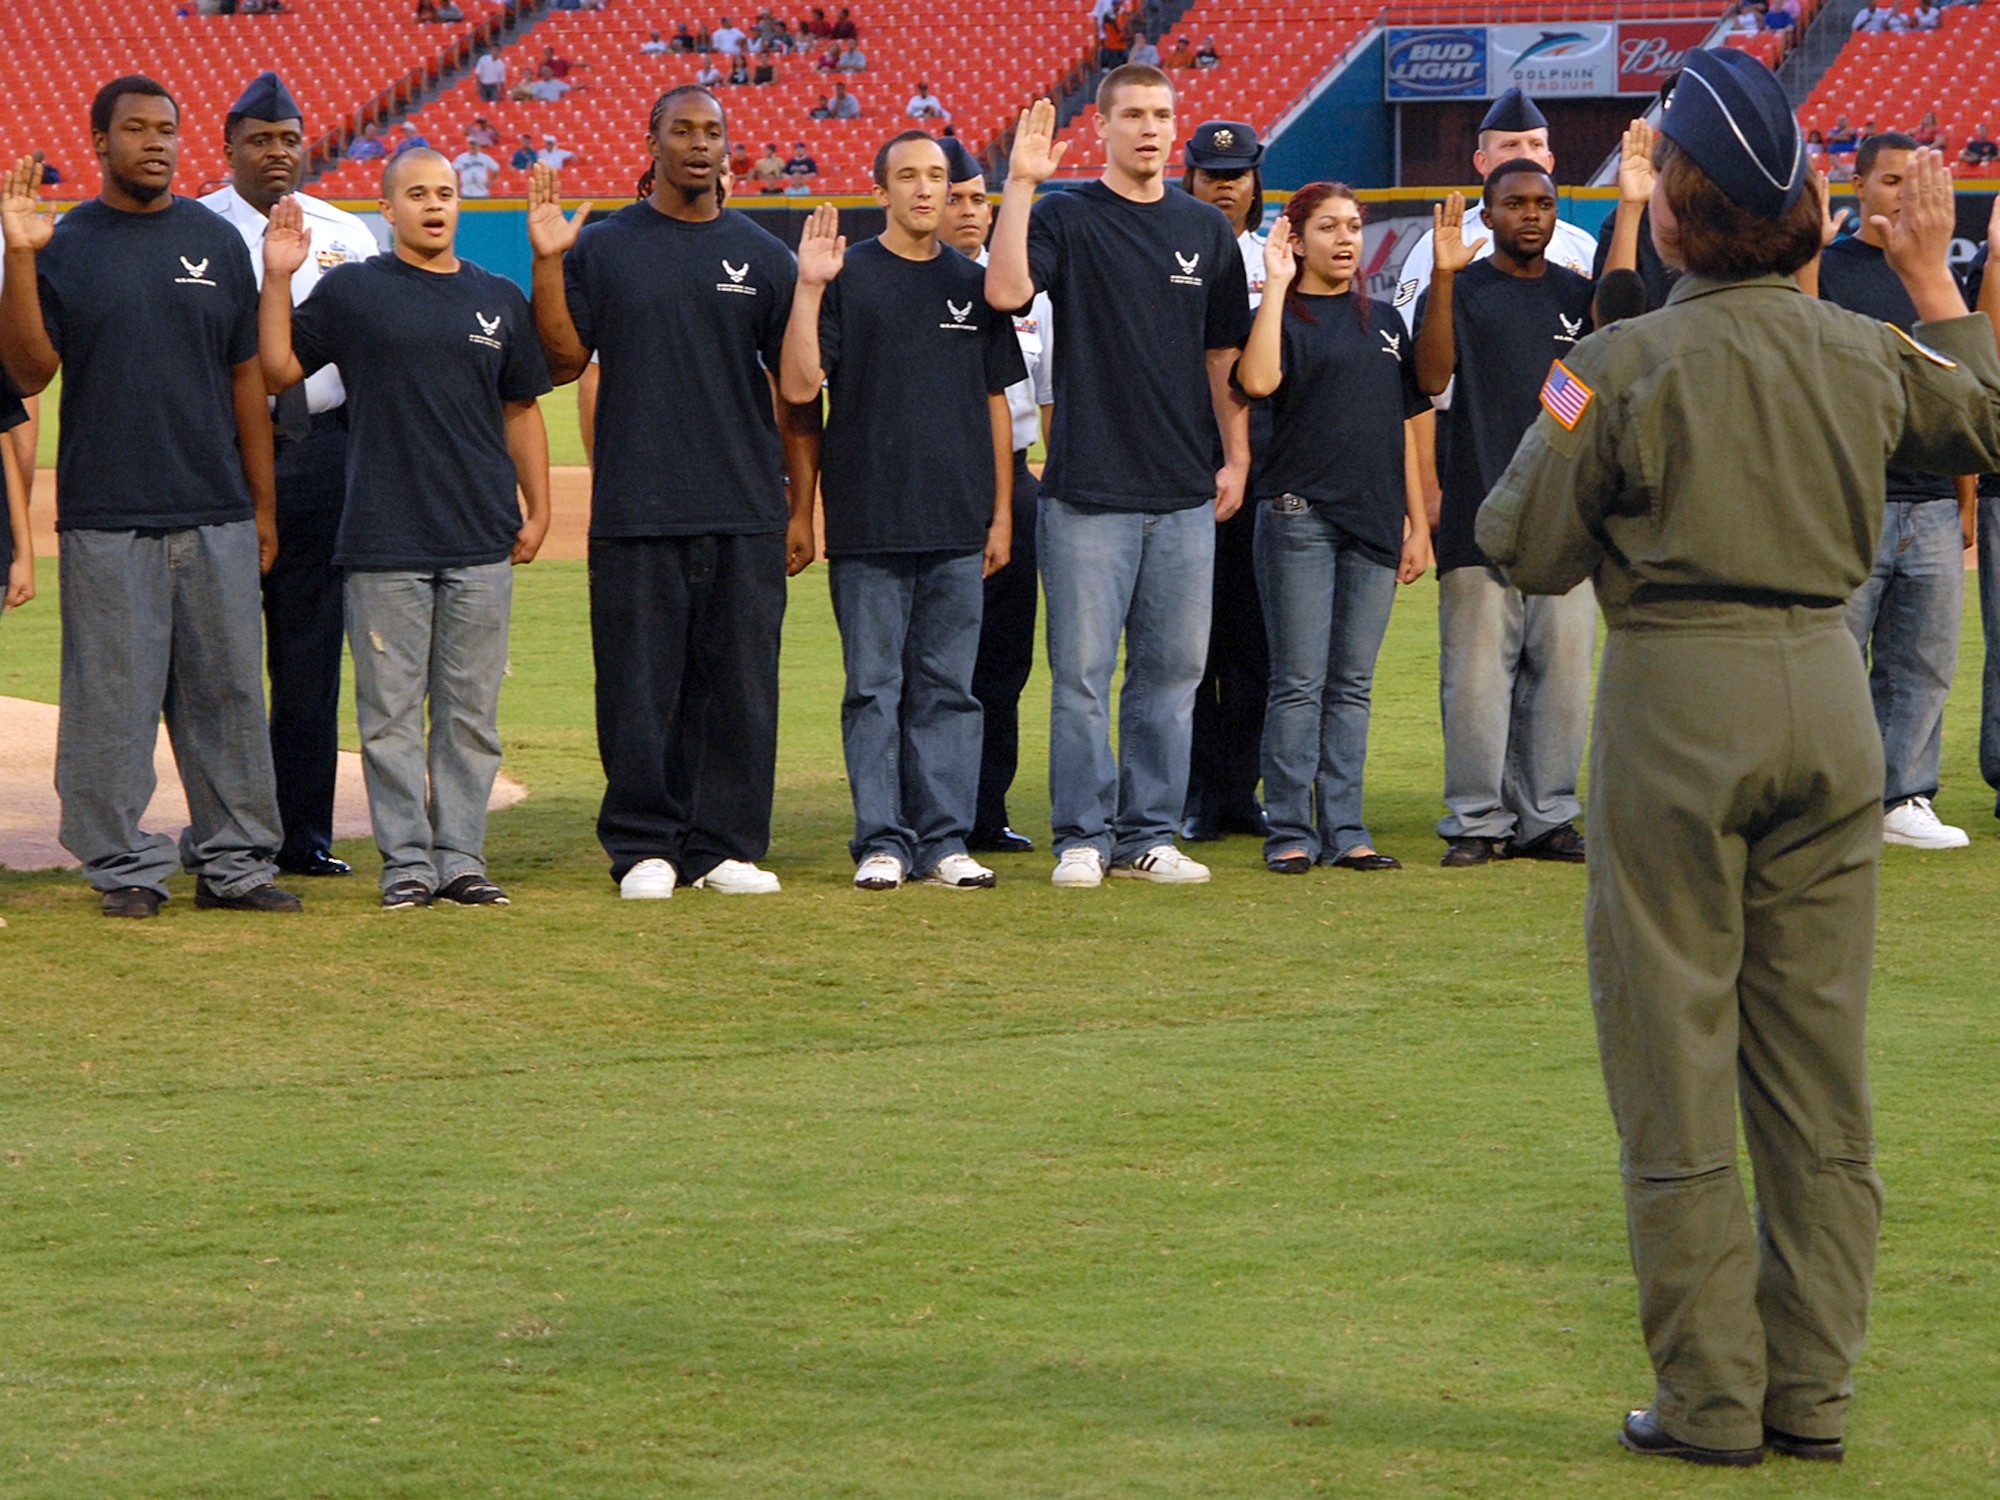 Brigadier General, Suzanne M. Vautrinot , commander of Air Force Recruiting Service, conducts a large-group enlistment swear-in before a Florida Marlins baseball game versus the New York Mets in Miami, Sept. 21.  The 333rd RCS worked with the Marlins marketing team to organize the event for the many new enlistees to happen before the beginning of the game.  (Photo/Army Sgt. Mitch Miller)